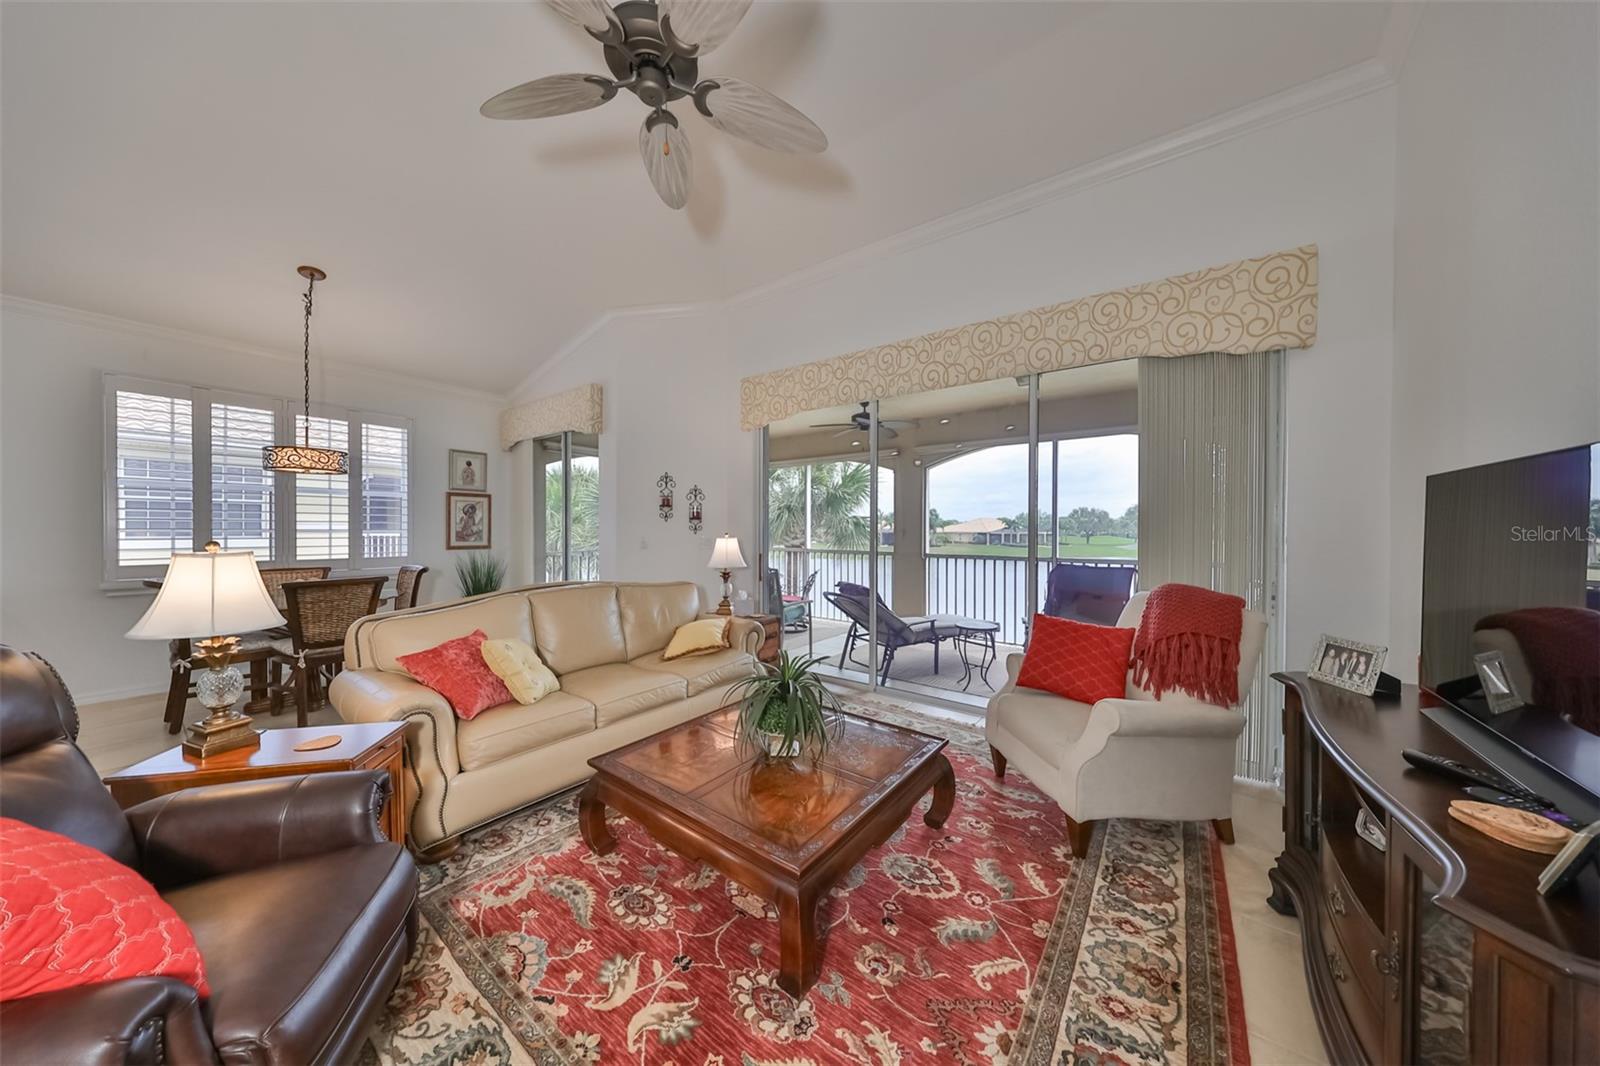 Living Room has vast water/golf course views, with lots of natural light making this space feel open and unencumbered, while also being relaxes and tranquil.